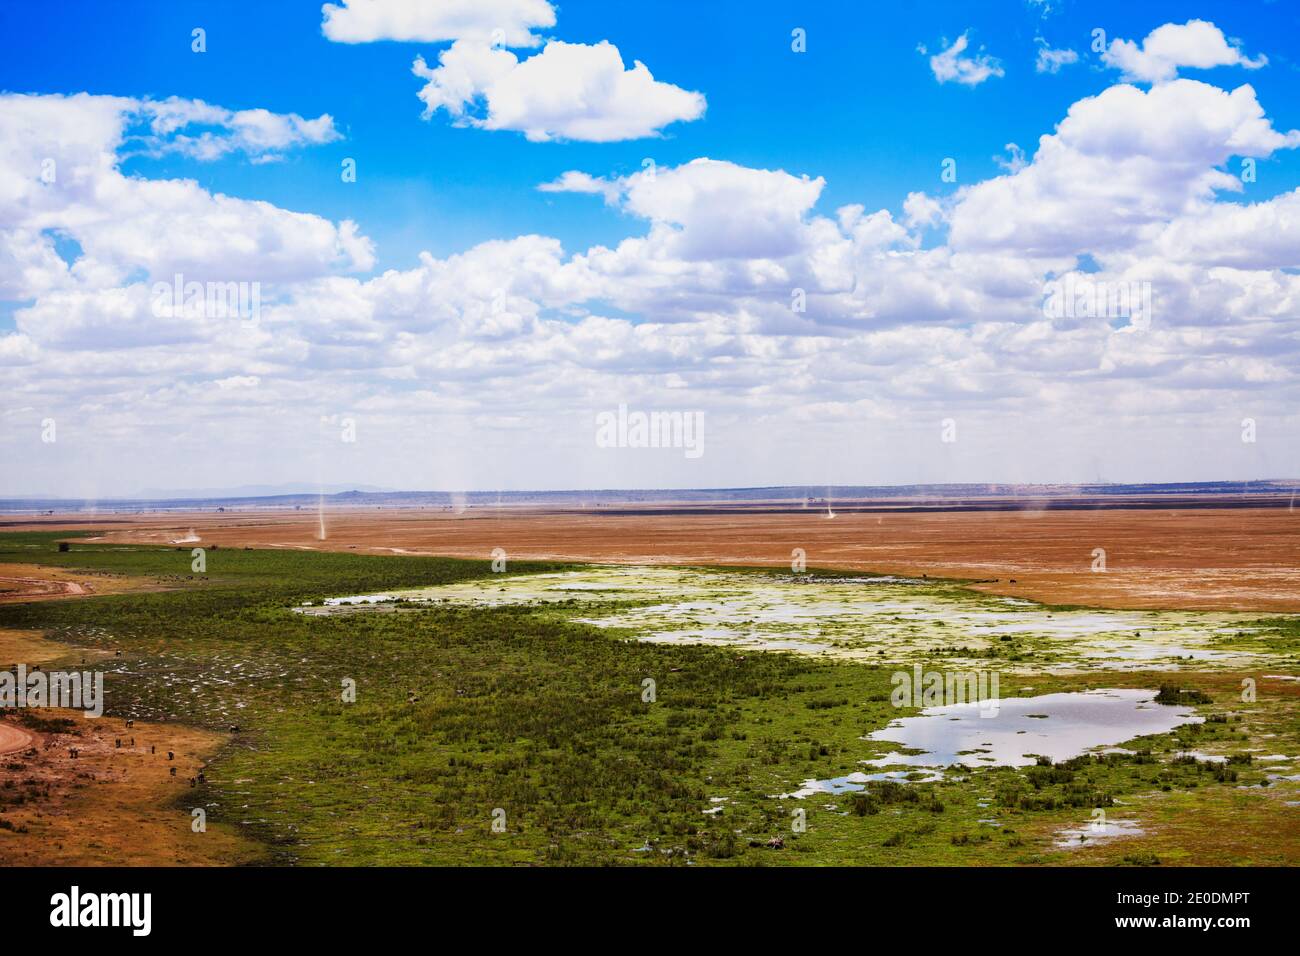 Panorama of savanna with many dust tornados on the plain in Amboseli National Park Stock Photo